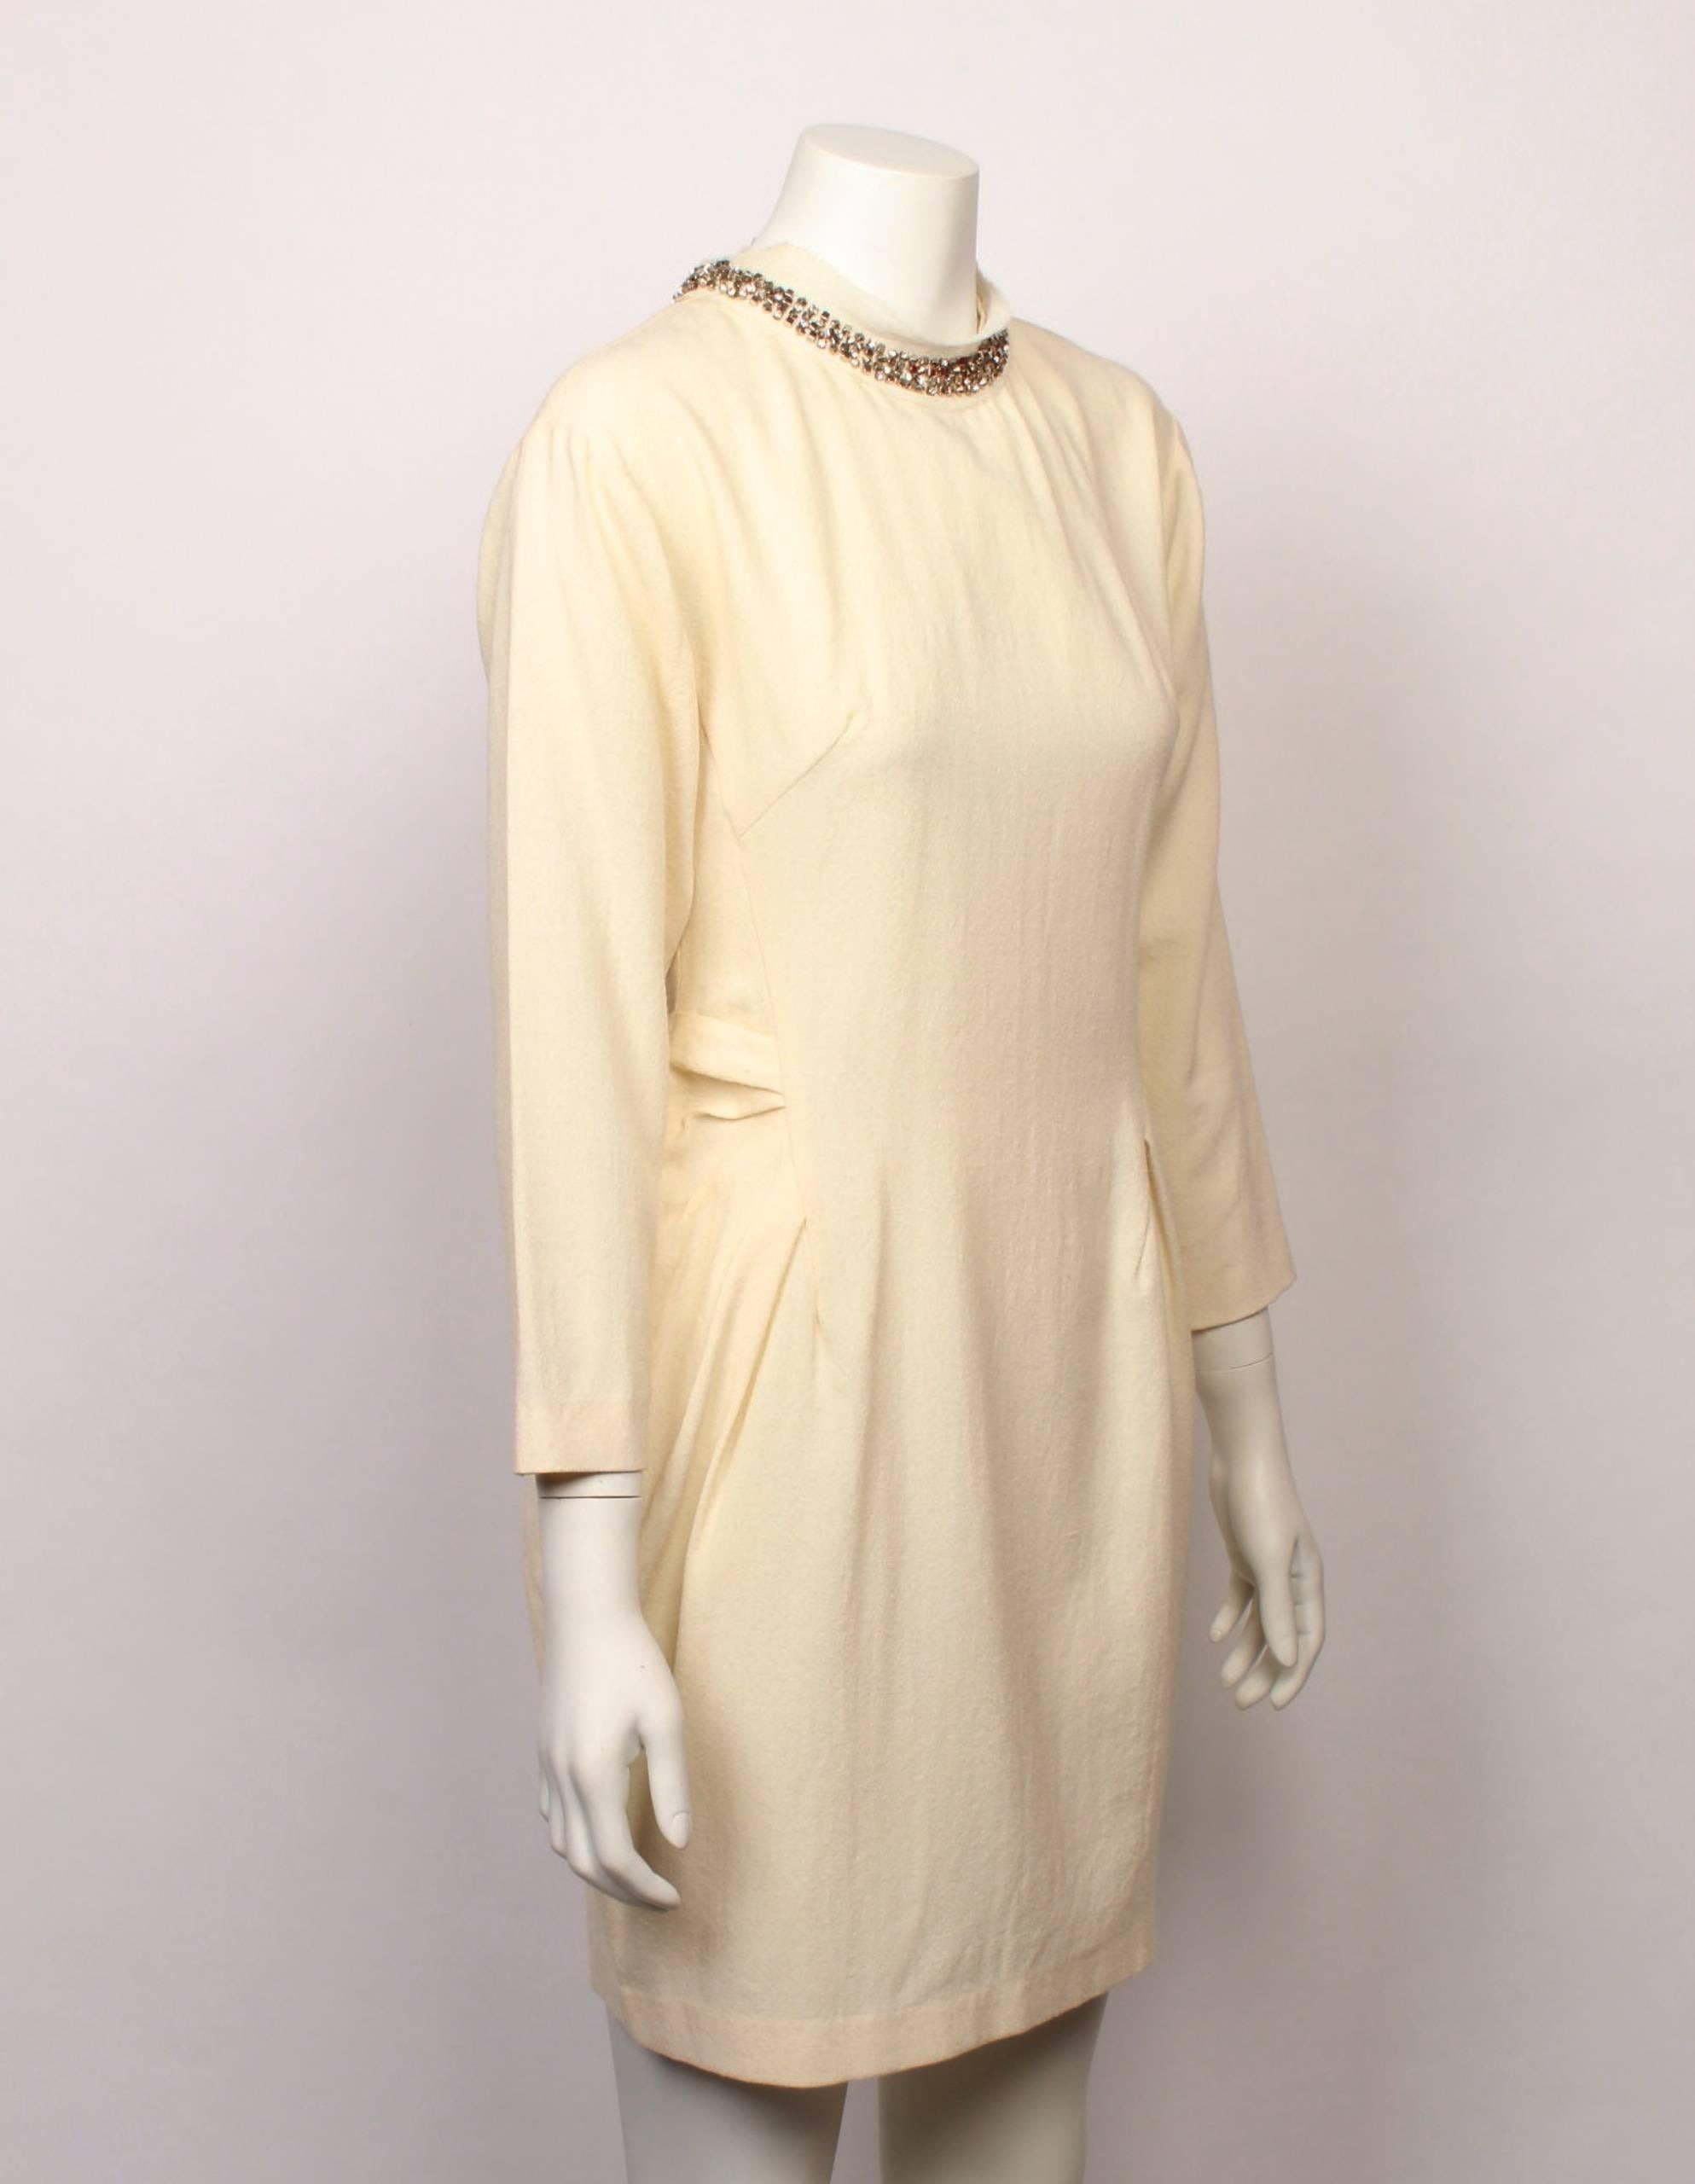 Chic Lanvin Paris ivory crepe long sleeve cocktail mini dress with beautiful metallic beading around neckline. Features gentle tucks and darts at side of waistline. Back metal zip closure. 
Made in France. Size Small.